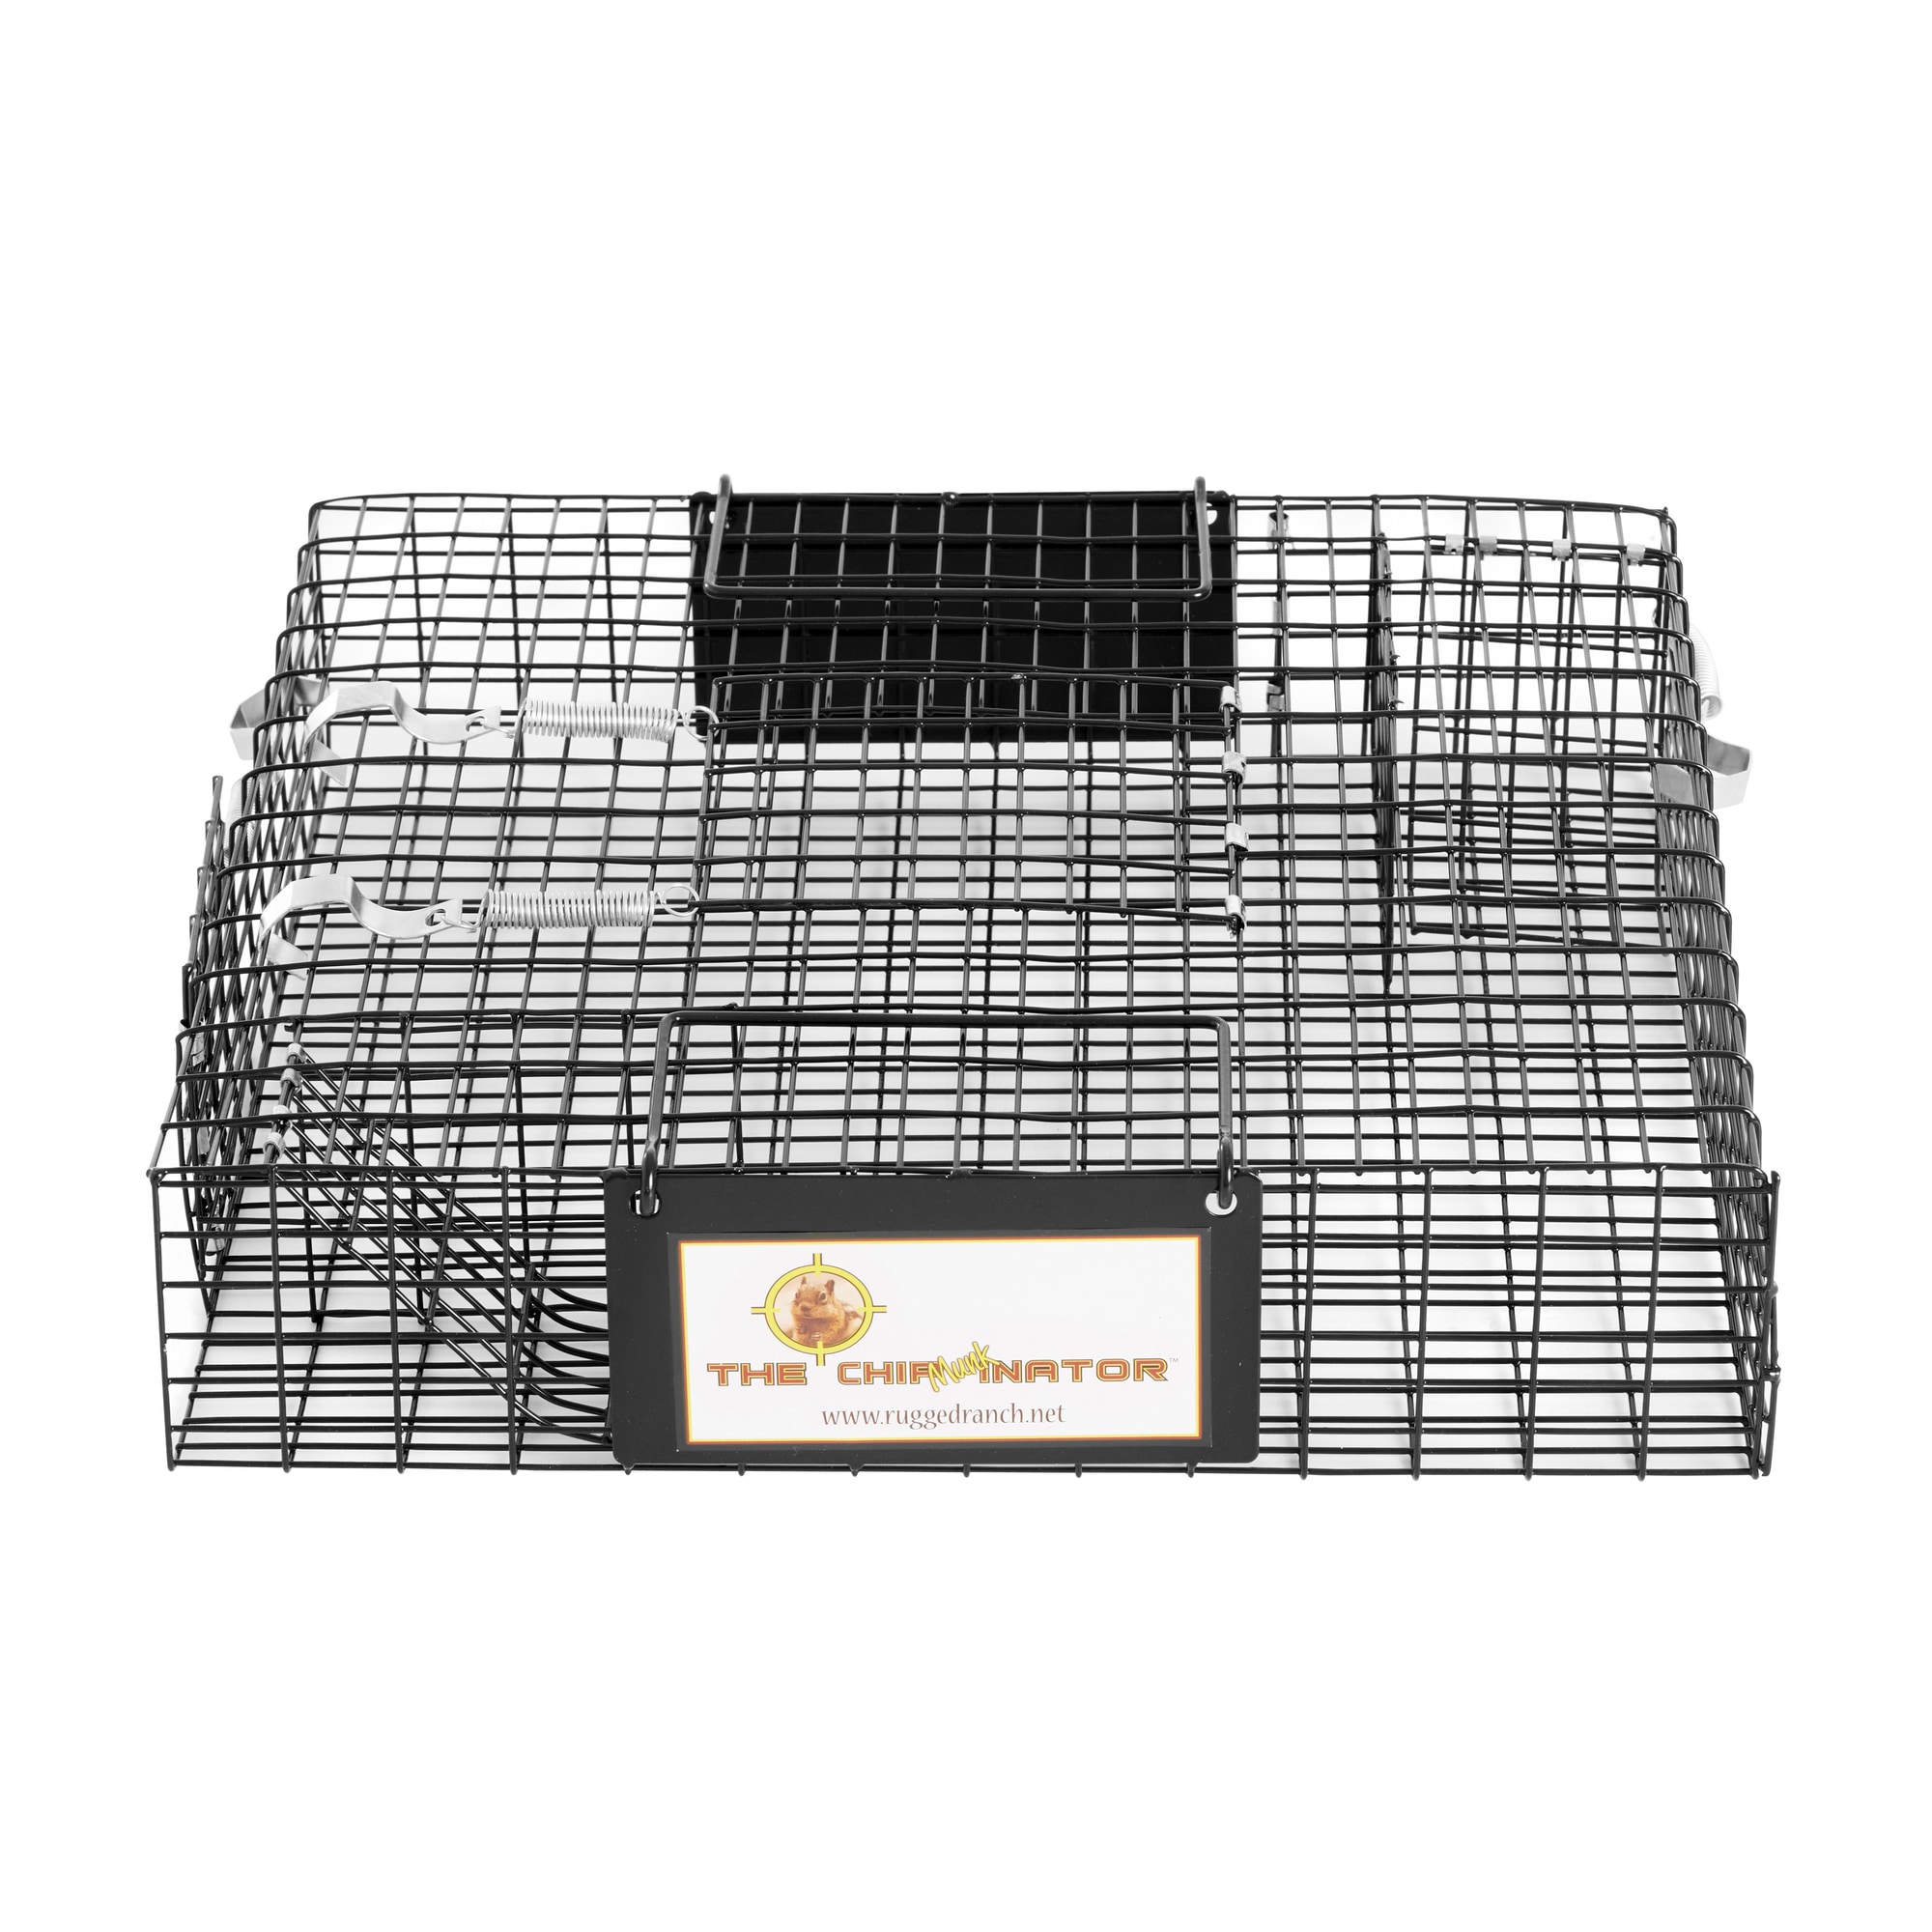 Gustave Rat Trap Cage Small Live Animal Pest Rodent Mouse Control